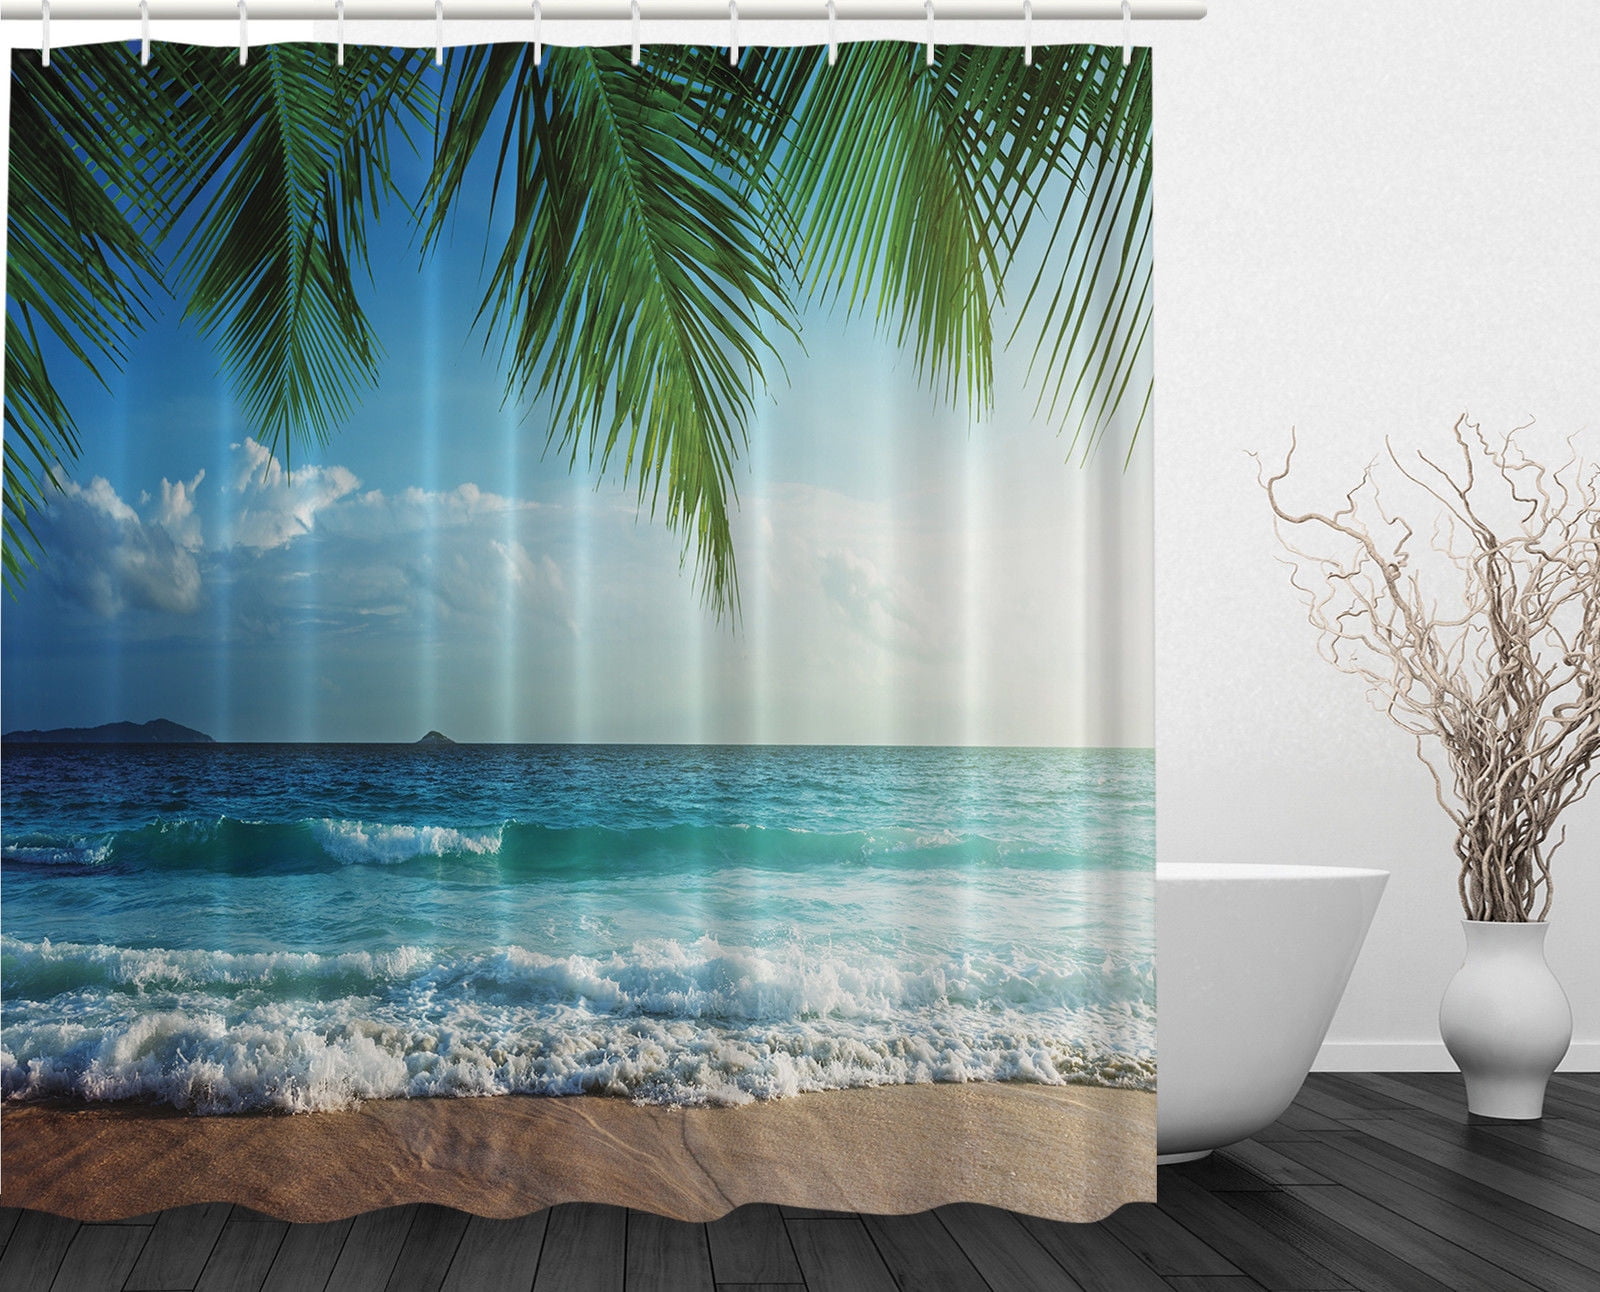 Palm Trees on Tropical Island Beach Panoramic Shower Curtain Extra Long 84 Inch 